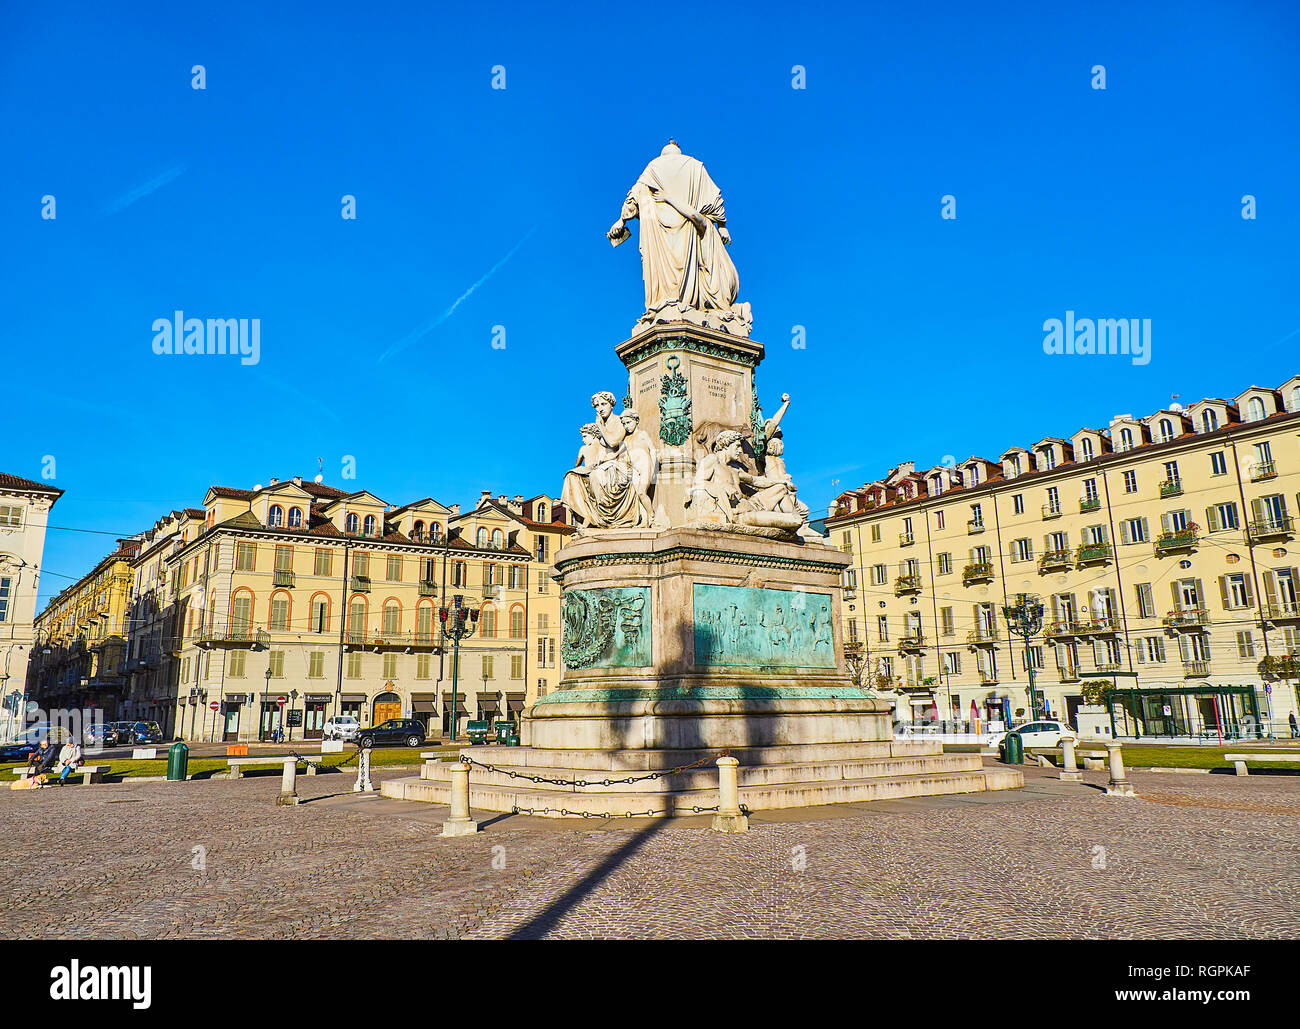 Camillo Benso, Count of Cavour, monument in Piazza Carlo Emanuele II square, also know as Piazza Carlina. Turin, Piedmont, Italy. Stock Photo